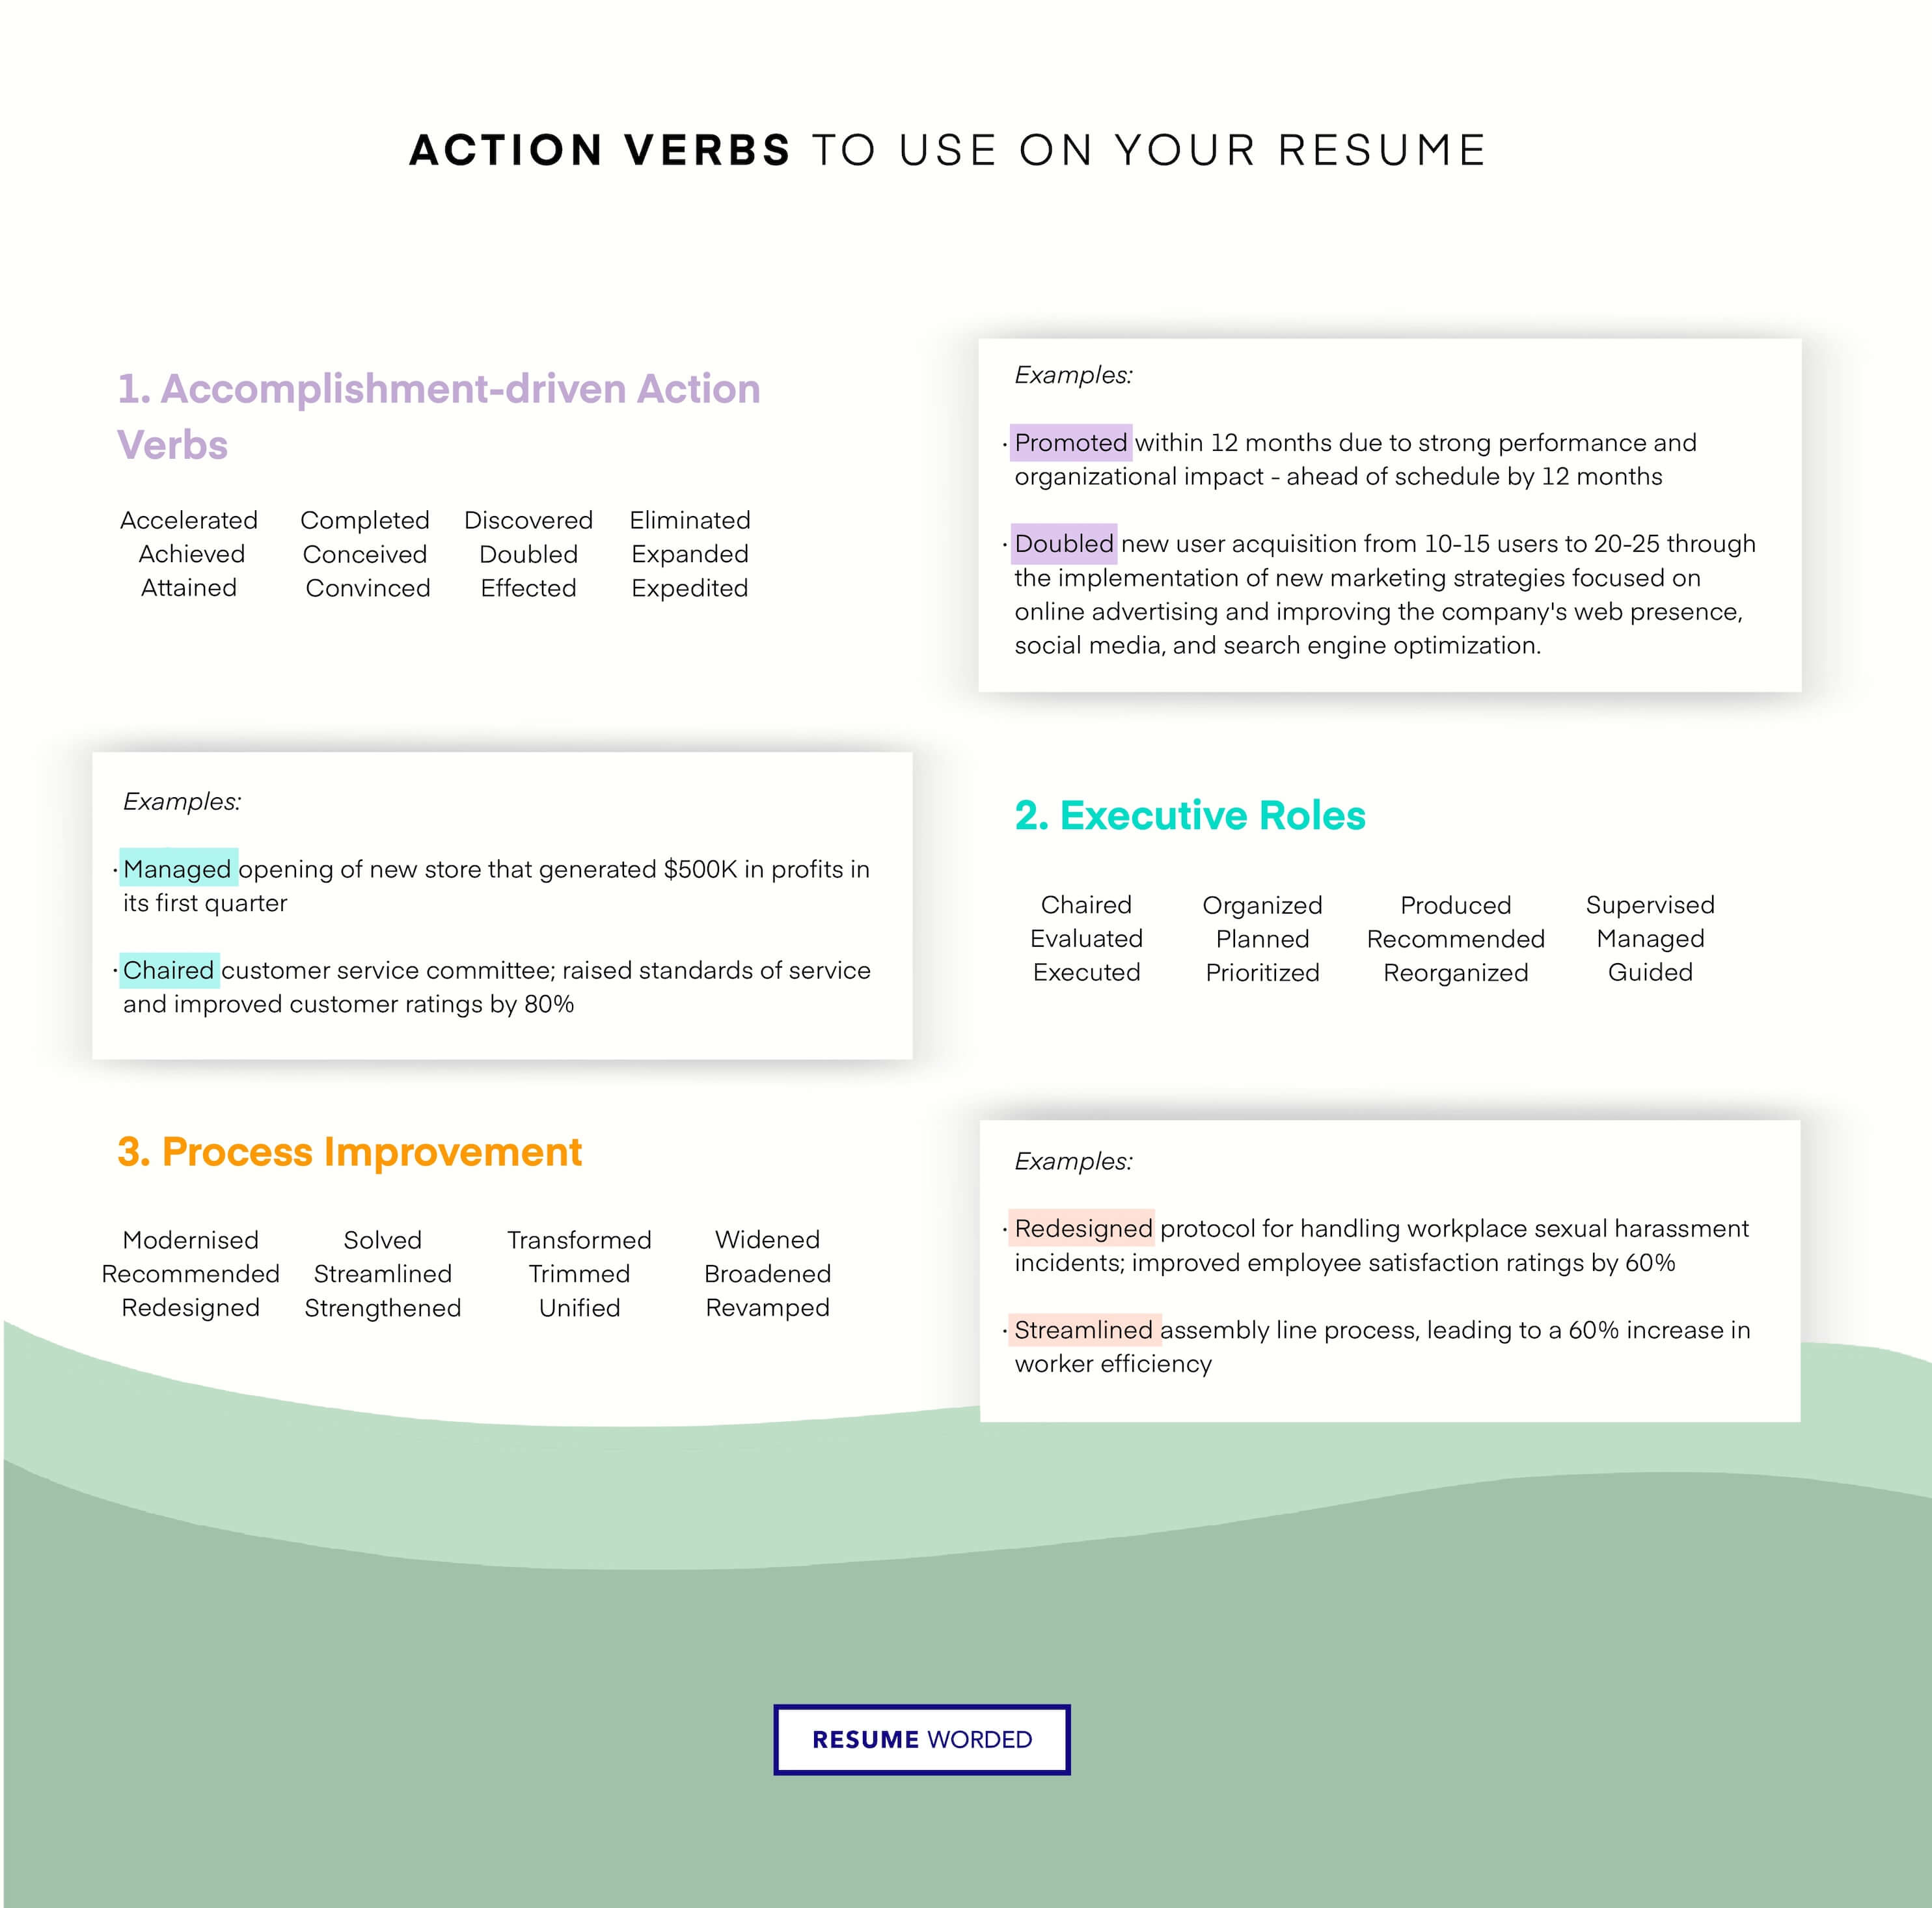 Uses effective action verbs to talk about achievements - Accounting Specialist Resume